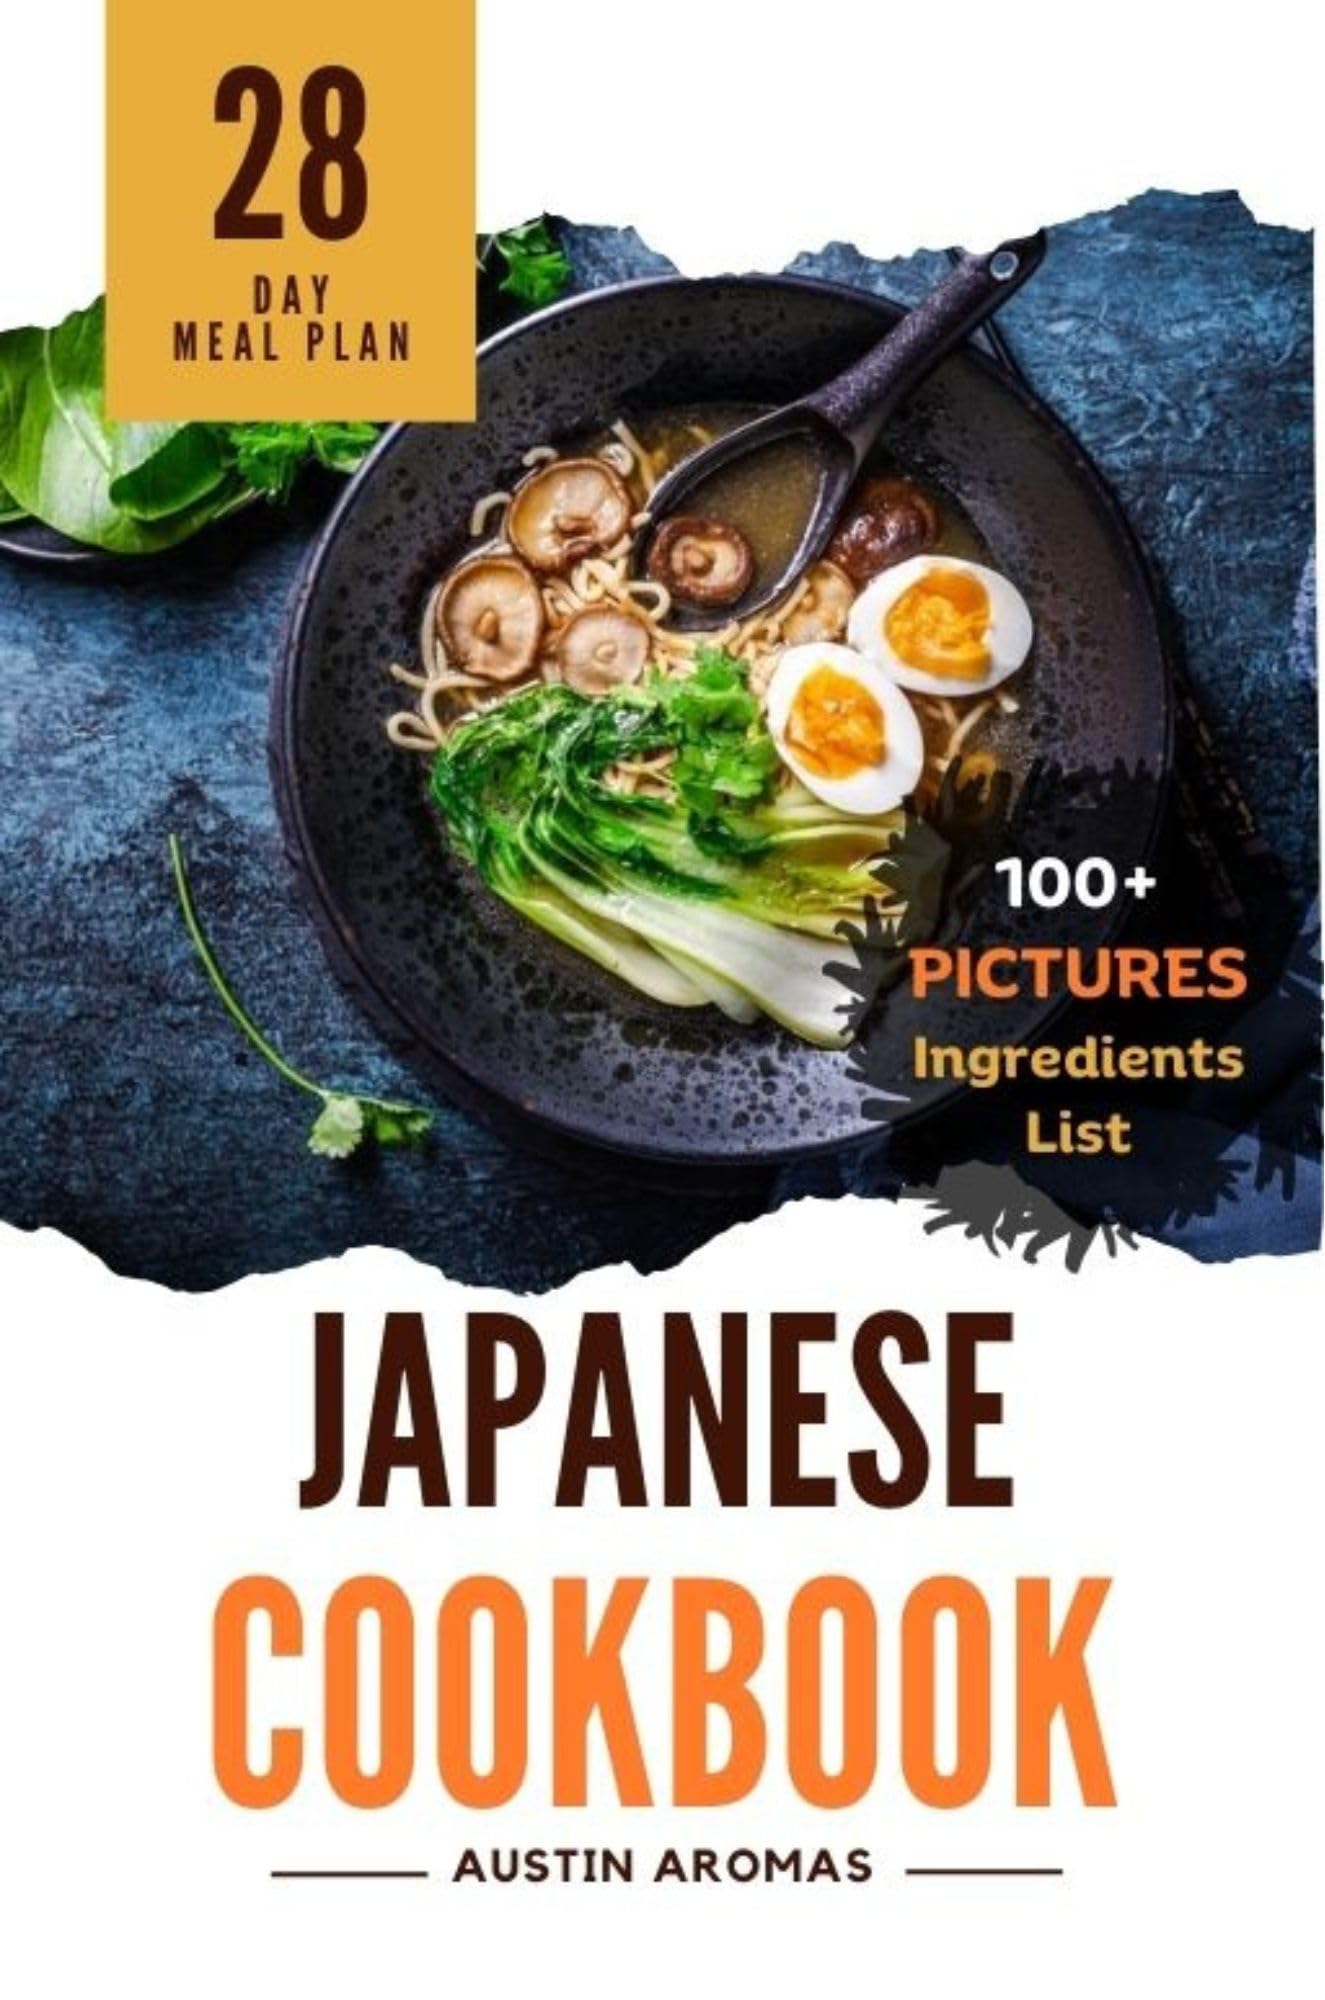 Japanese Cookbook: A Comprehensive Guide to Ingredients, Equipment, and Authentic Recipes with 100 Plus Pictures!